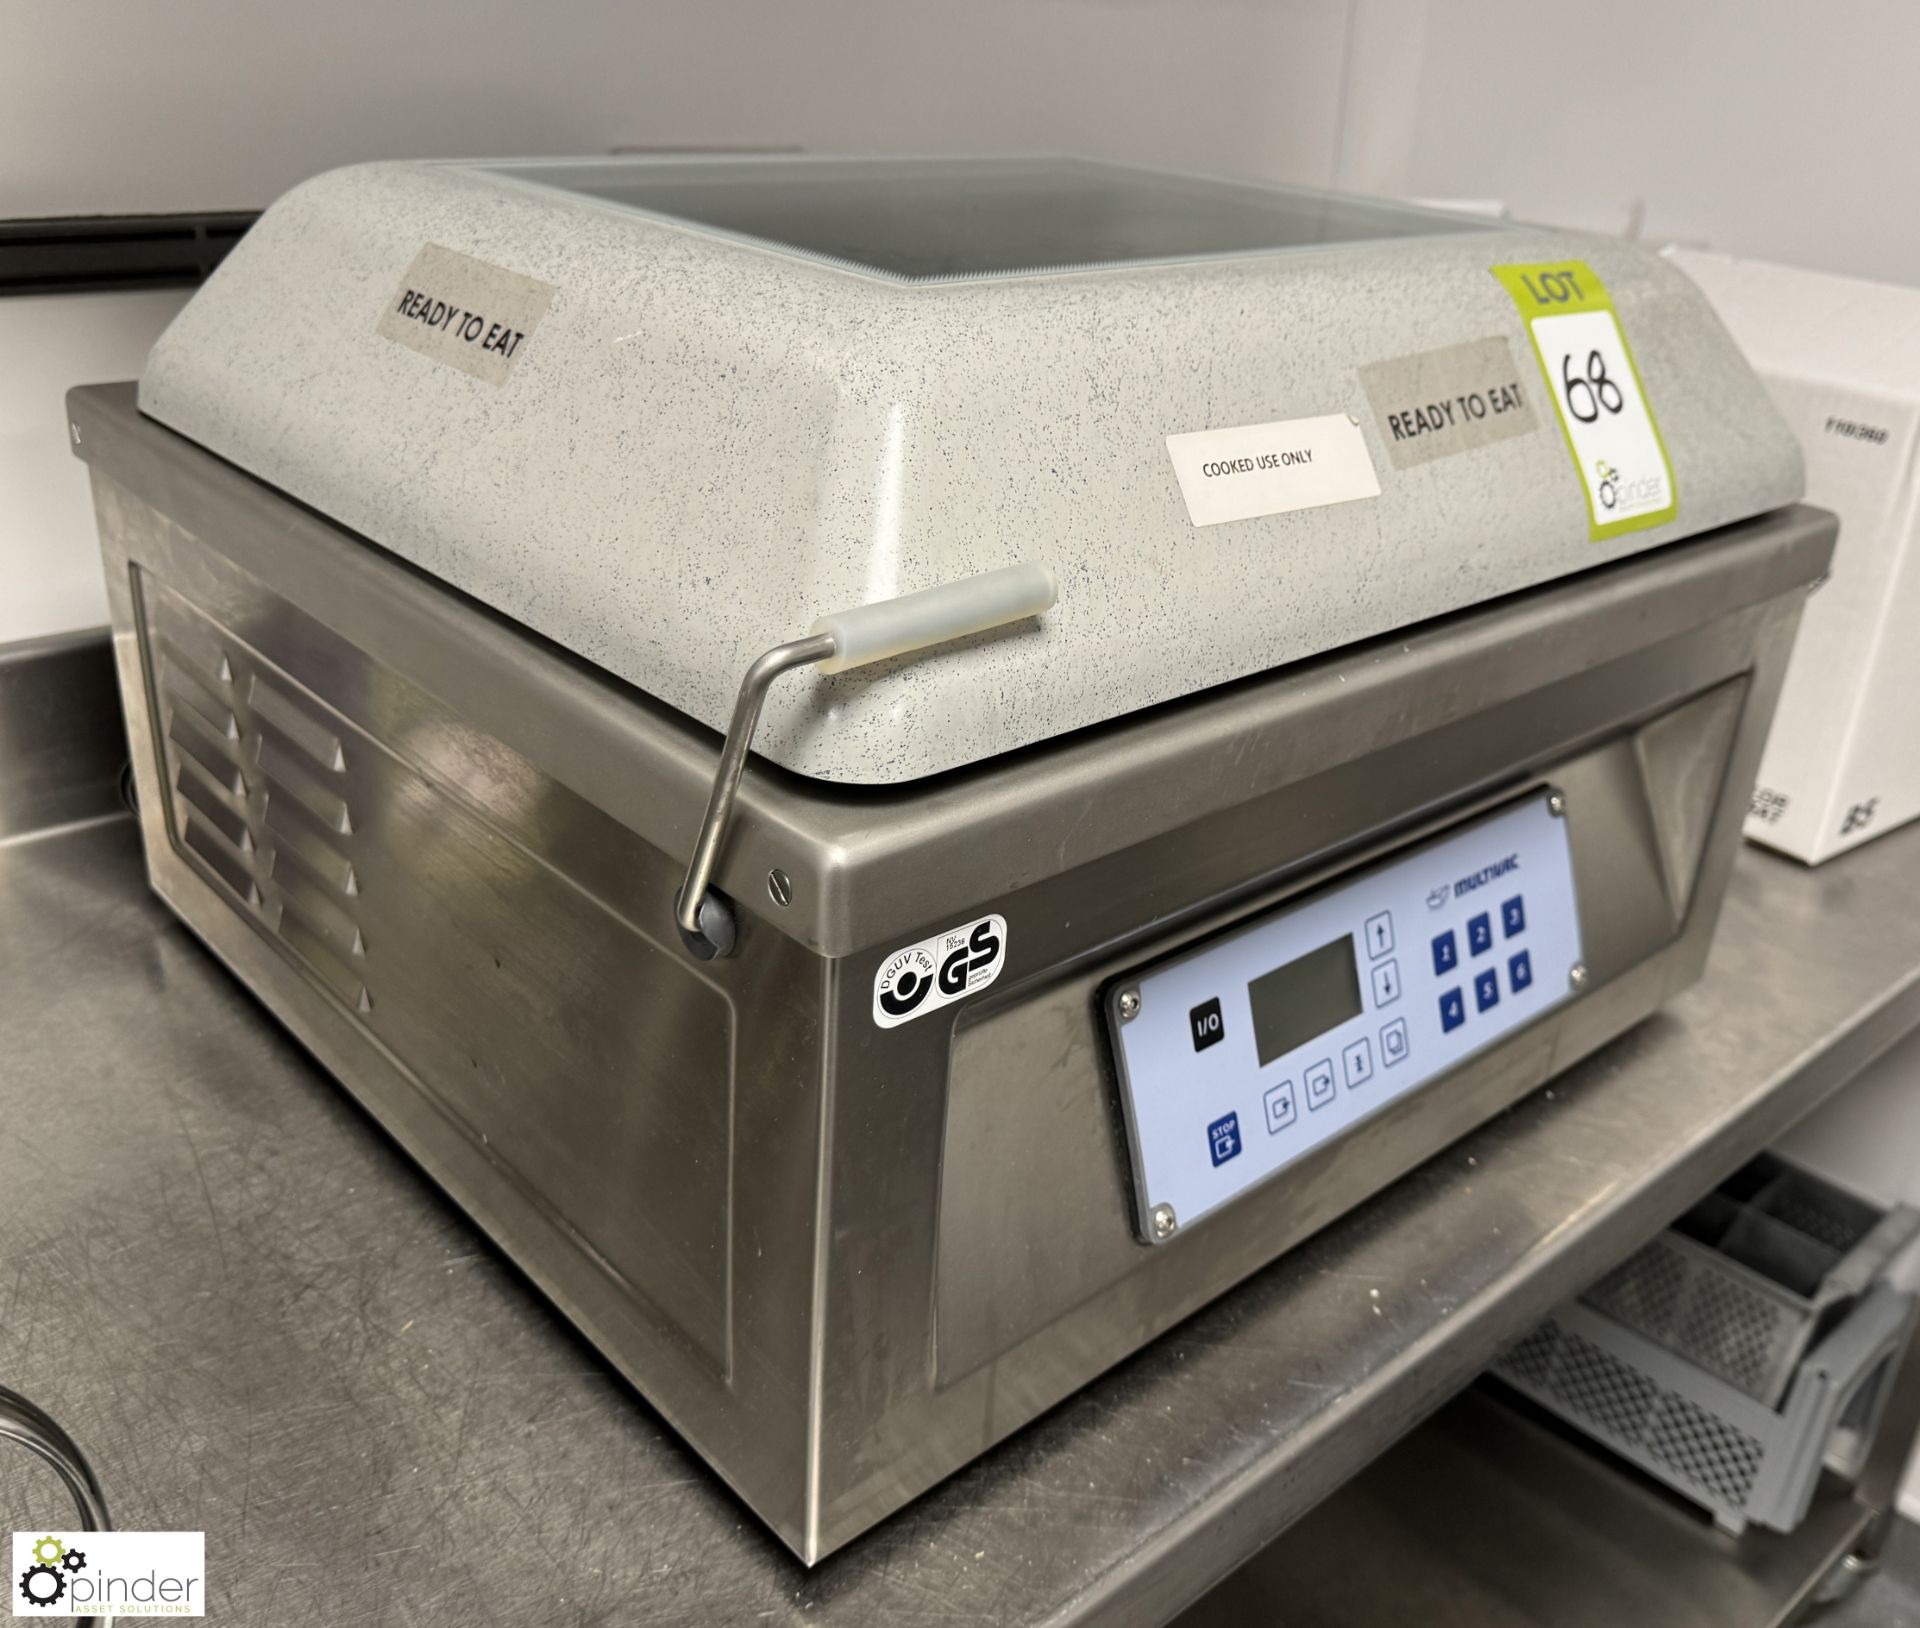 Multivac C200 counter top Vacuum Packer, 240volts, year 2015 (location in building – basement - Image 2 of 5